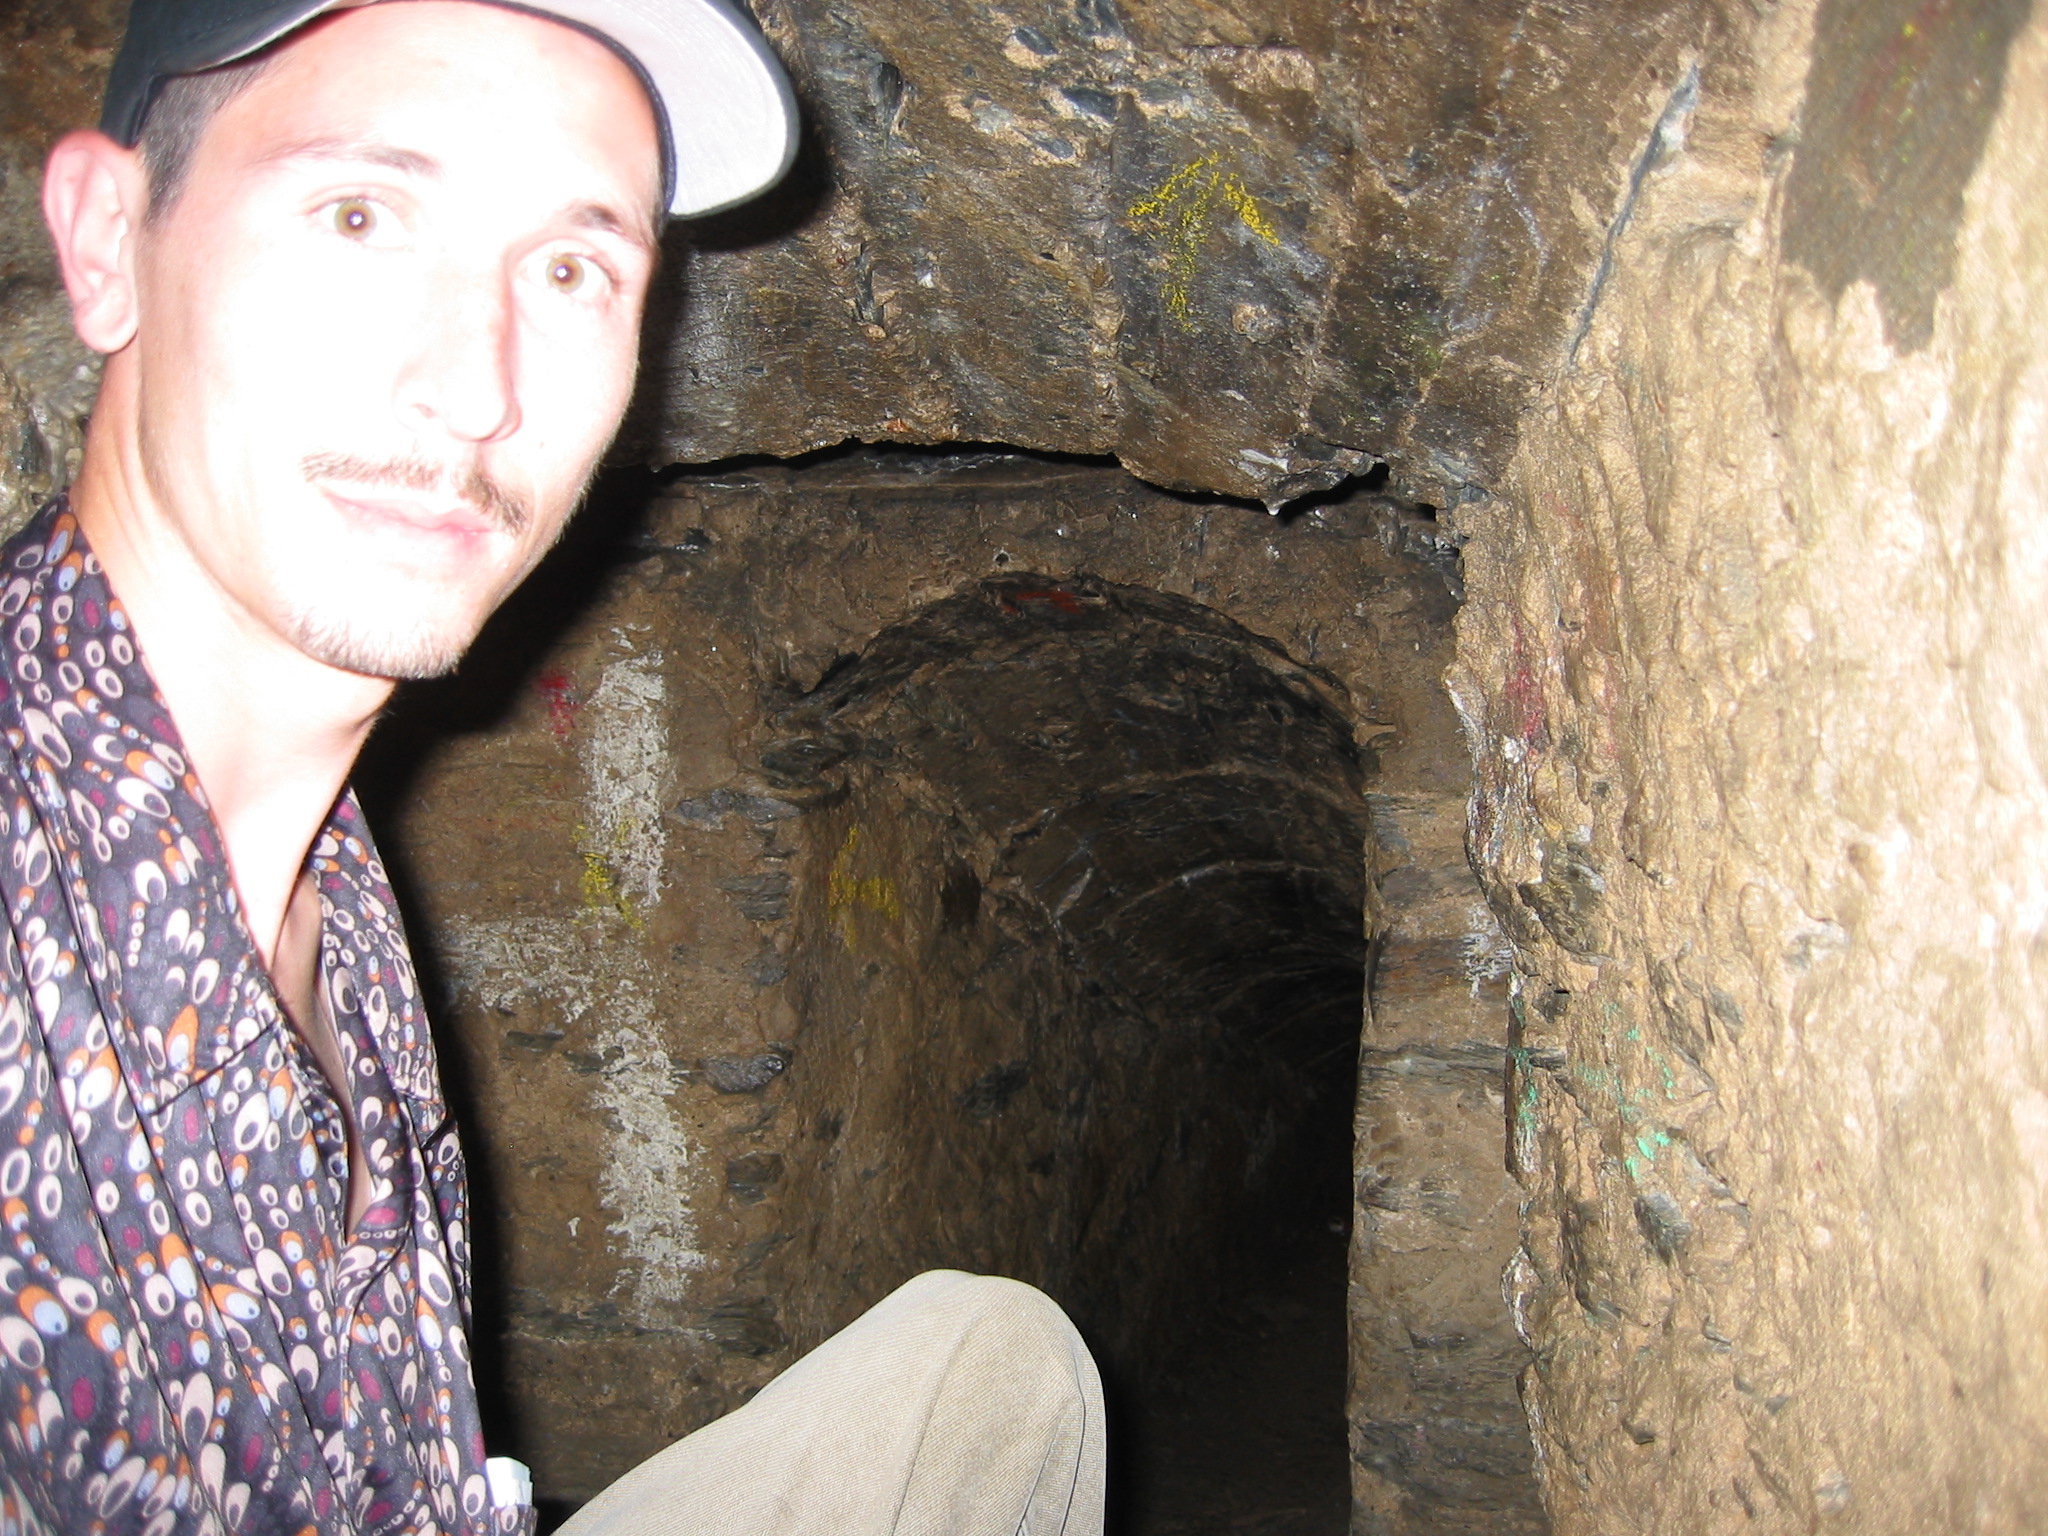 Small tunnels are below the castle, the camera flash is brief